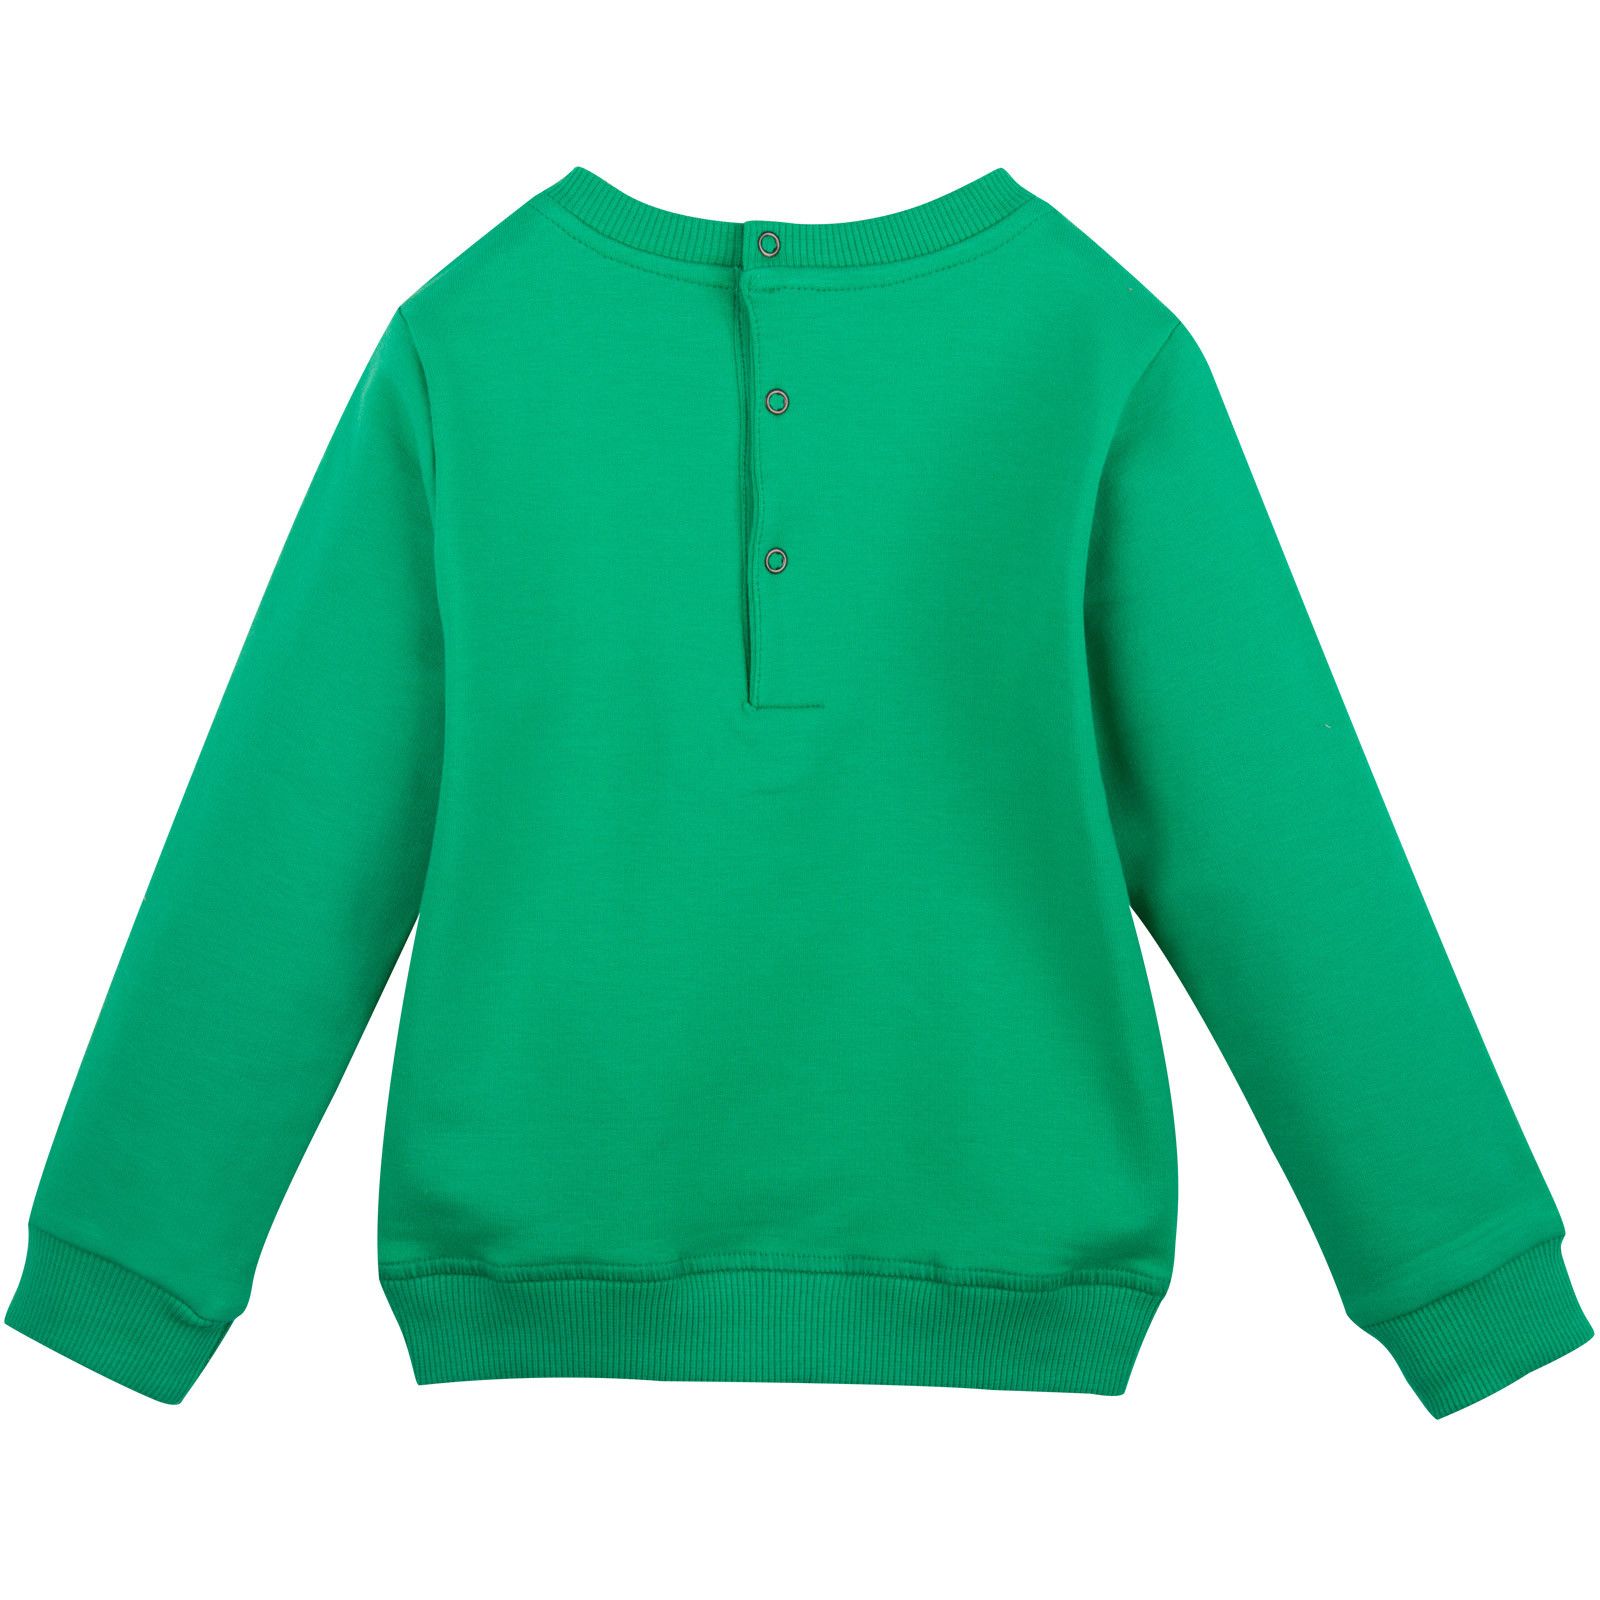 Baby Green Tiger Embroidered Sweatshirt With Buttons - CÉMAROSE | Children's Fashion Store - 2